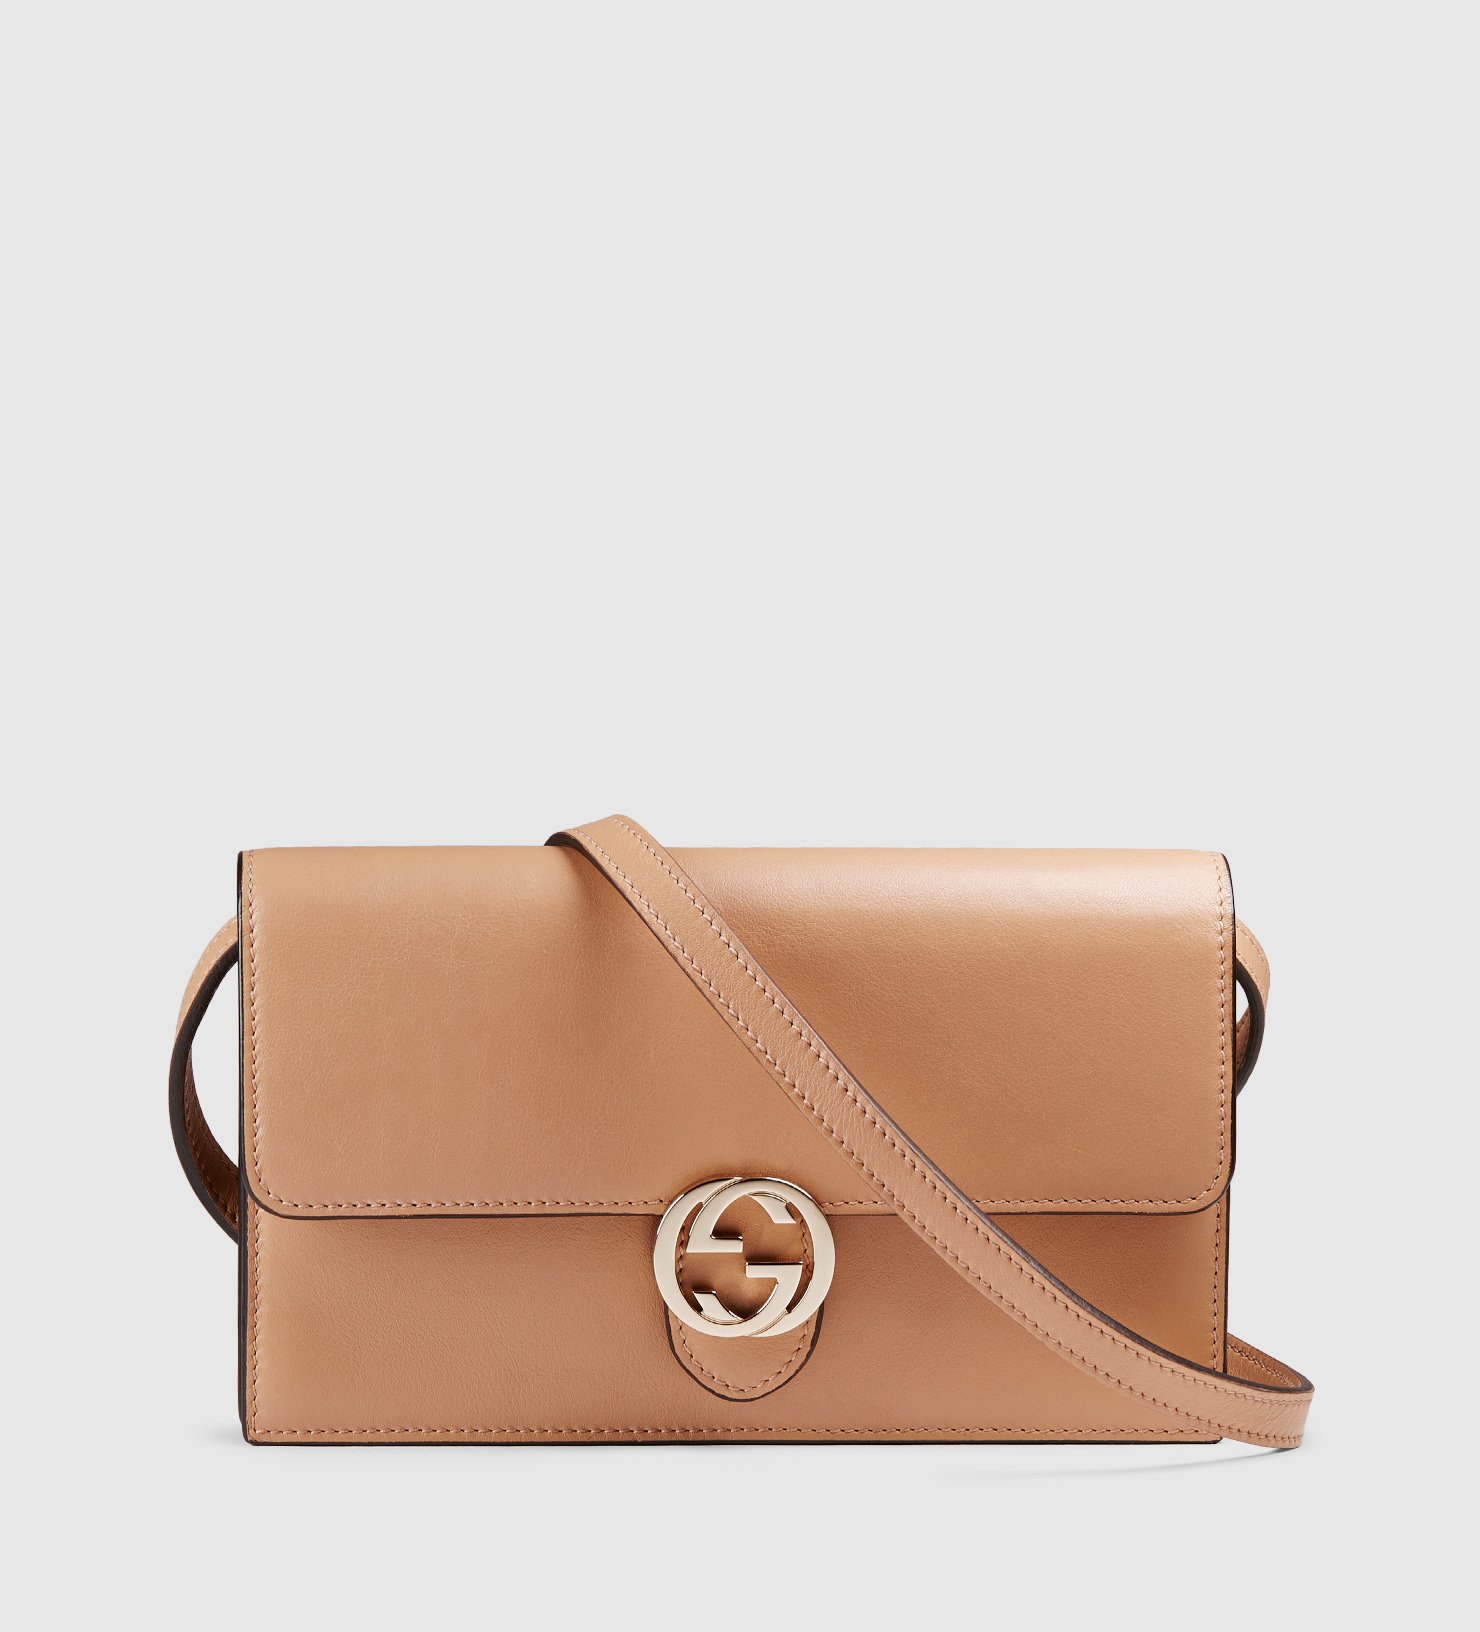 Lyst - Gucci Icon Leather Wallet With Strap in Natural